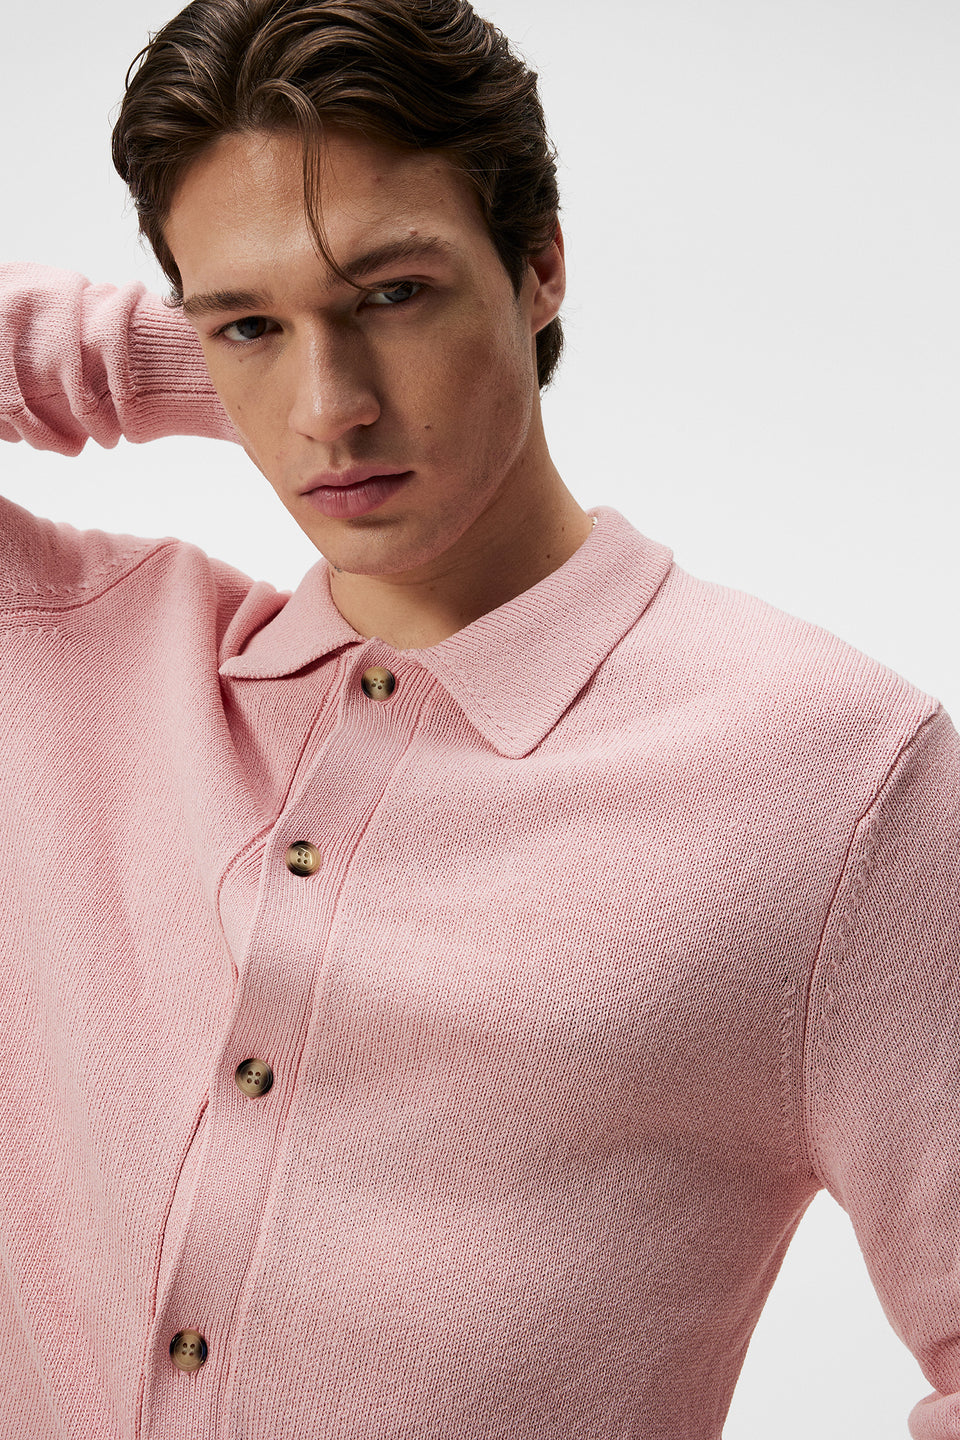 Willem Textured Knit Polo / Powder Pink